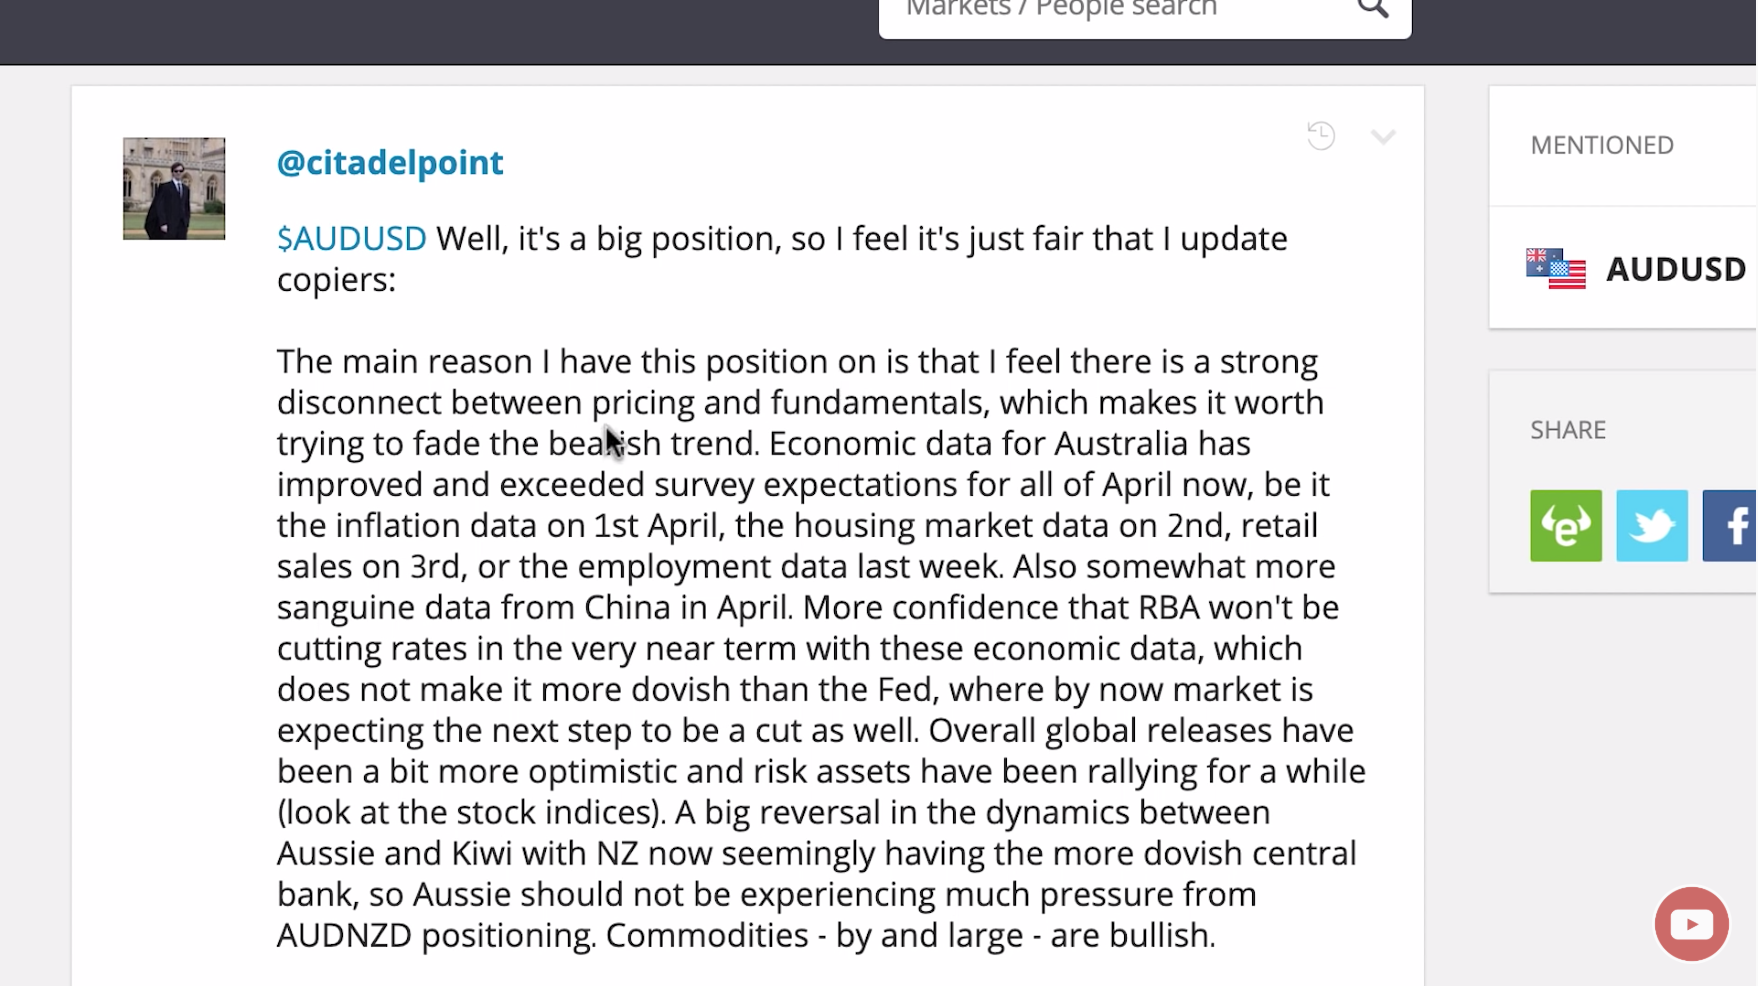 A trader's post about the AUD/USD trade in question